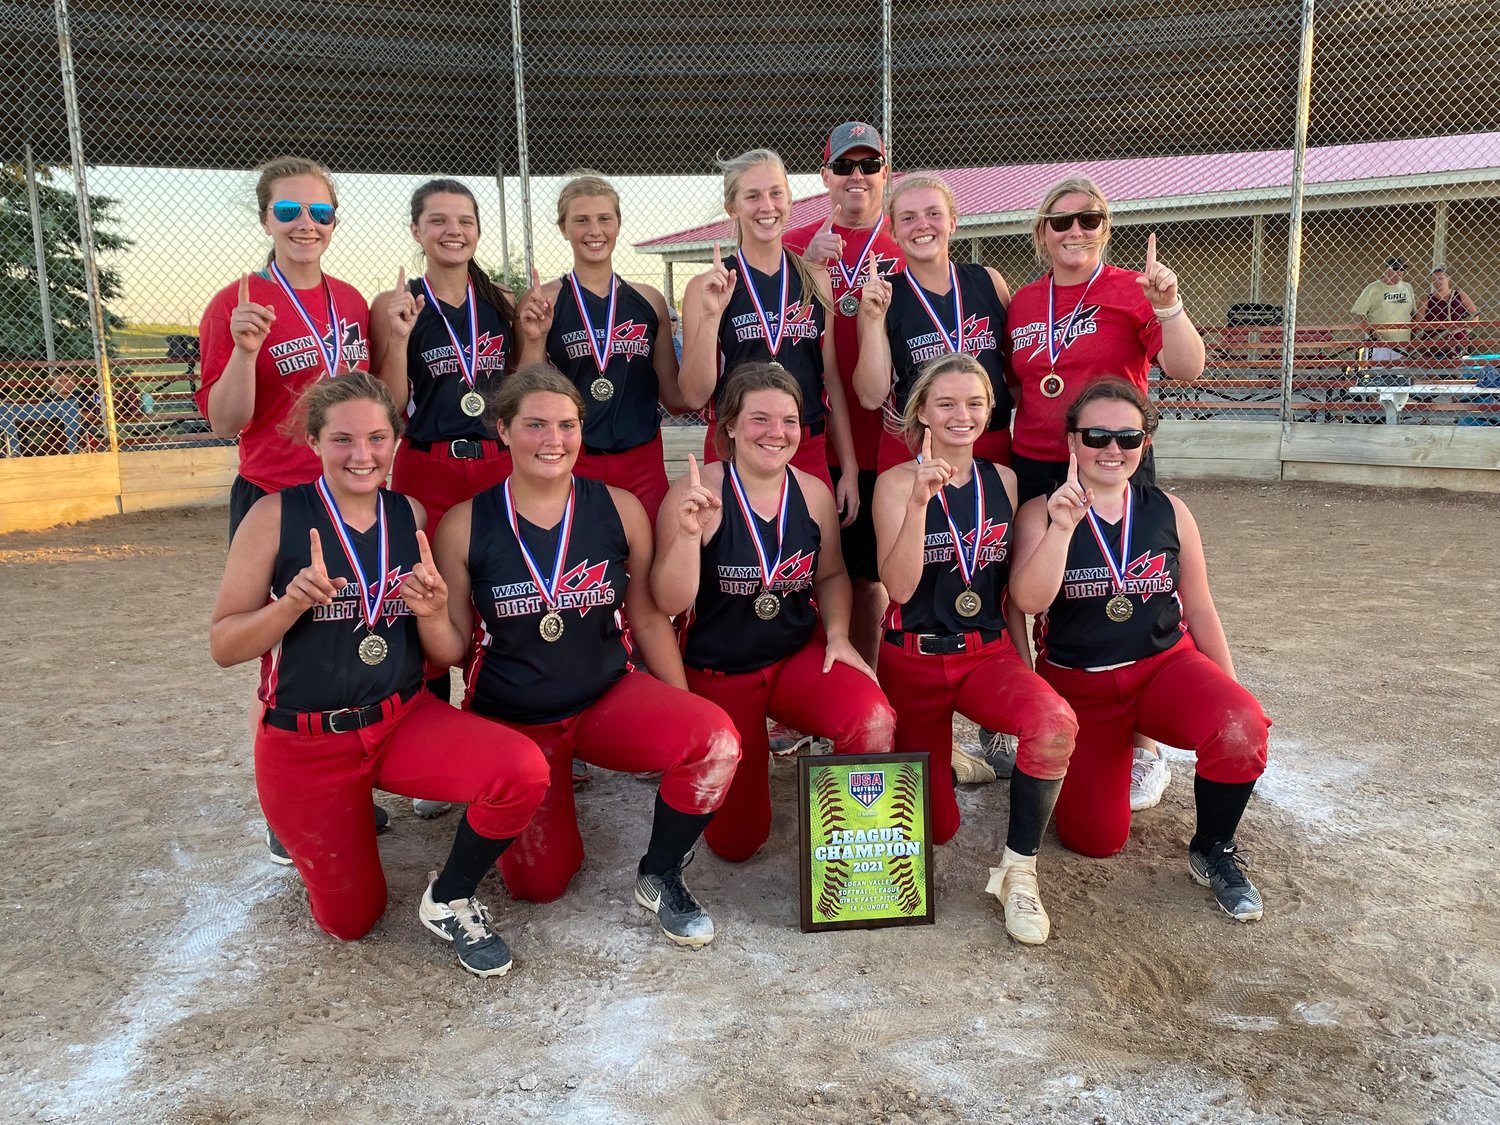 The Wayne Dirt Devils 14-under team won the Logan Valley League tournament title with an exciting, come-from-behind win over the Fremont Force, scoring two in the bottom of the sixth to win 3-2. (front) Lily Gubbels, Sammi Gubbels, Caitlyn Mostek, Kierah Haase, Carli Canham, (back) coach Sidney Biggerstaff, Tatum Ellis, Jersi Jensen, Delaney Kruse, coach Brandon Hall, Rylin Hall and coach Annie Knieche.